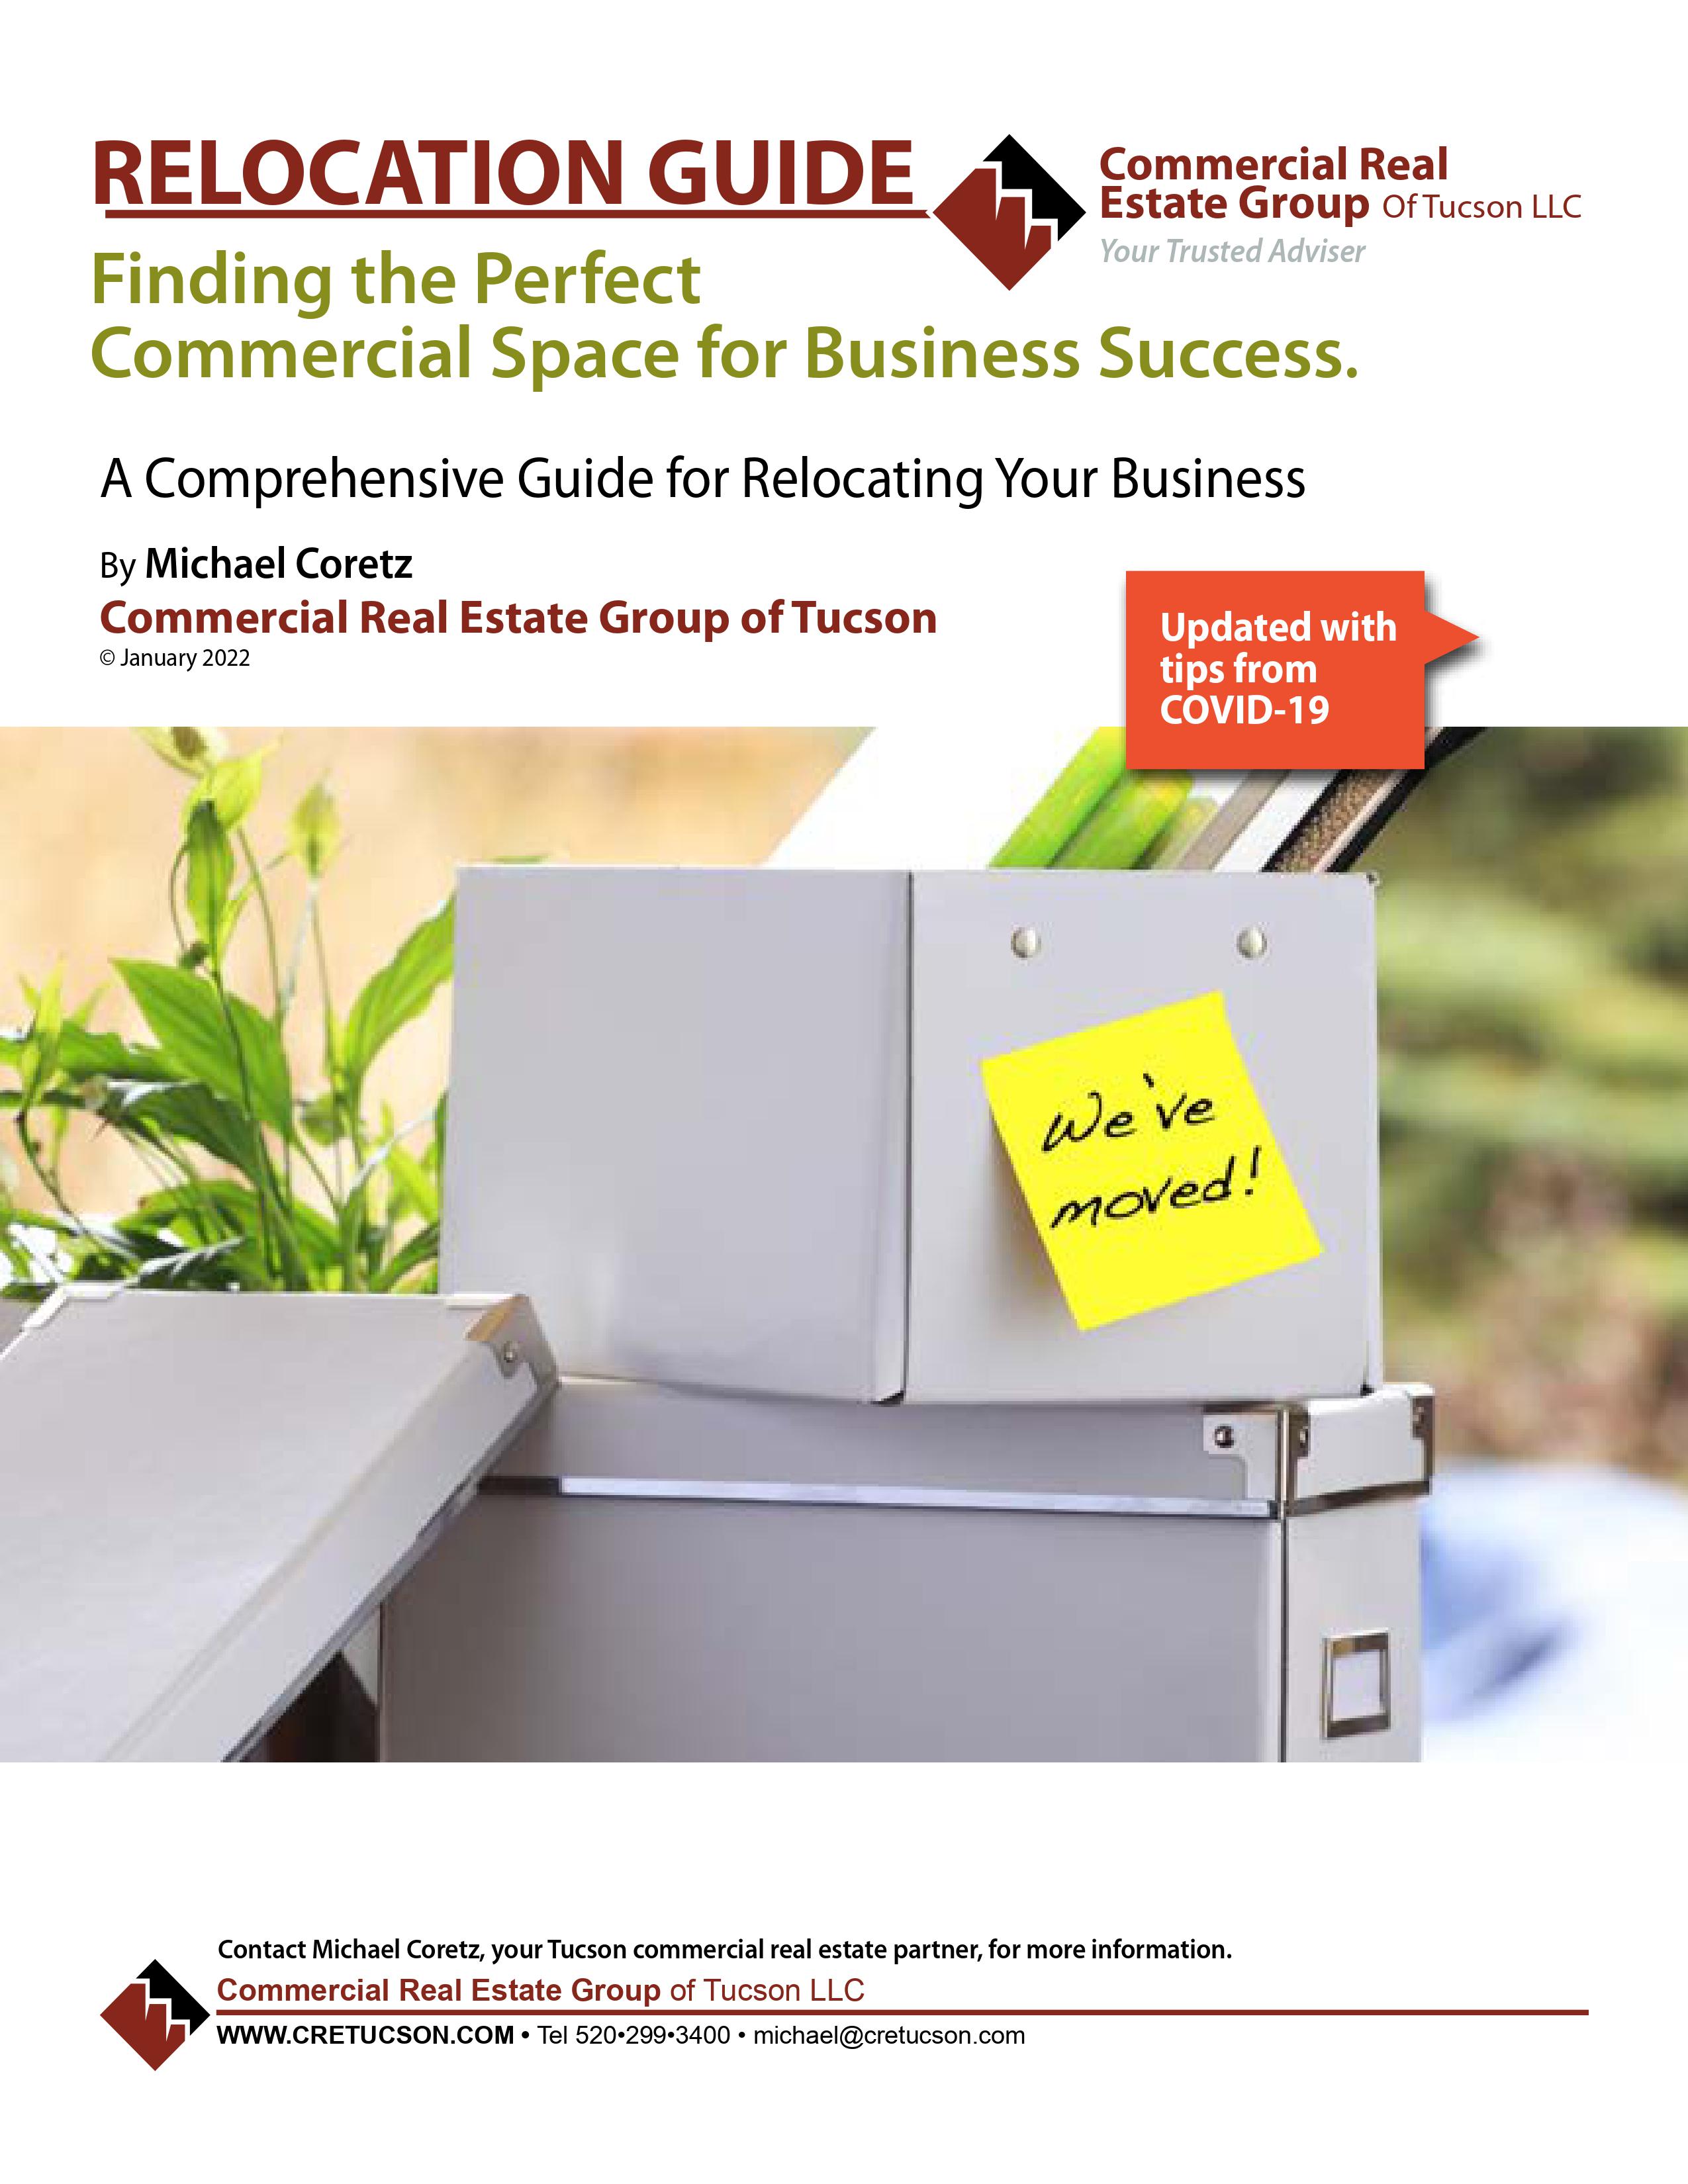 Front page of the relocation guide includes the text: “Relocation guide, Finding the perfect commercial space for business success. A comprehensive guide for relocating your business. By Michael Coretz, Commercial Real Estate Group of Tucson. Updated with tips from COVID-19.” A photograph shows a stack of small boxes, the top one without a lid and a sticky note attached that says We’ve moved! A potted plant is behind the boxes.